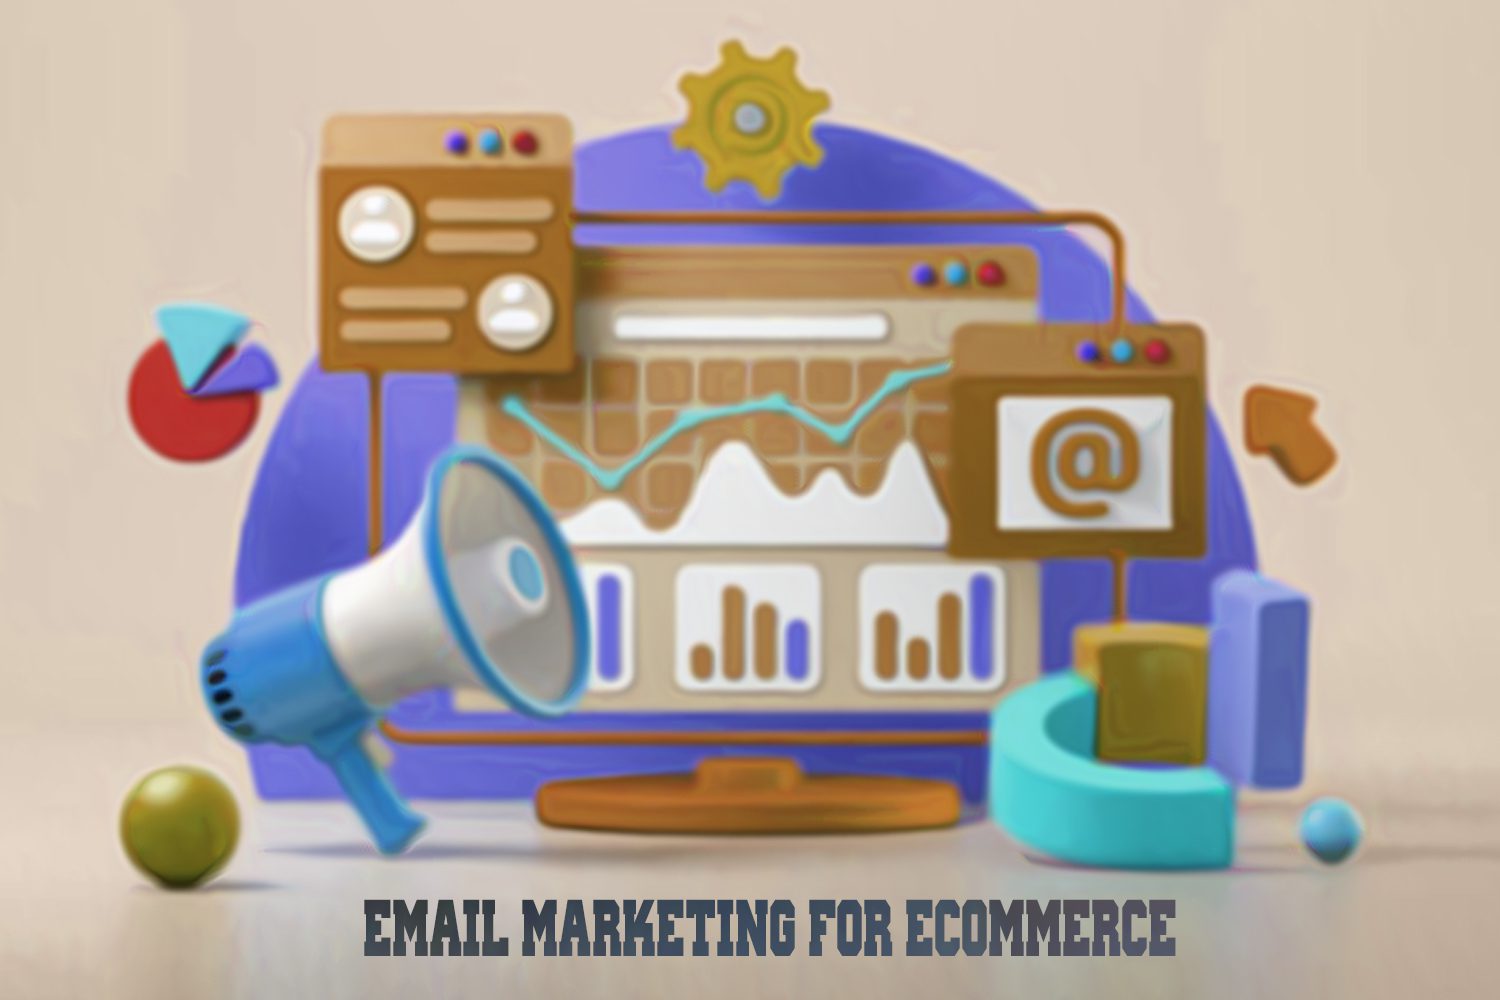 Understand Email Marketing for Ecommerce & 4 Tips to Get Started